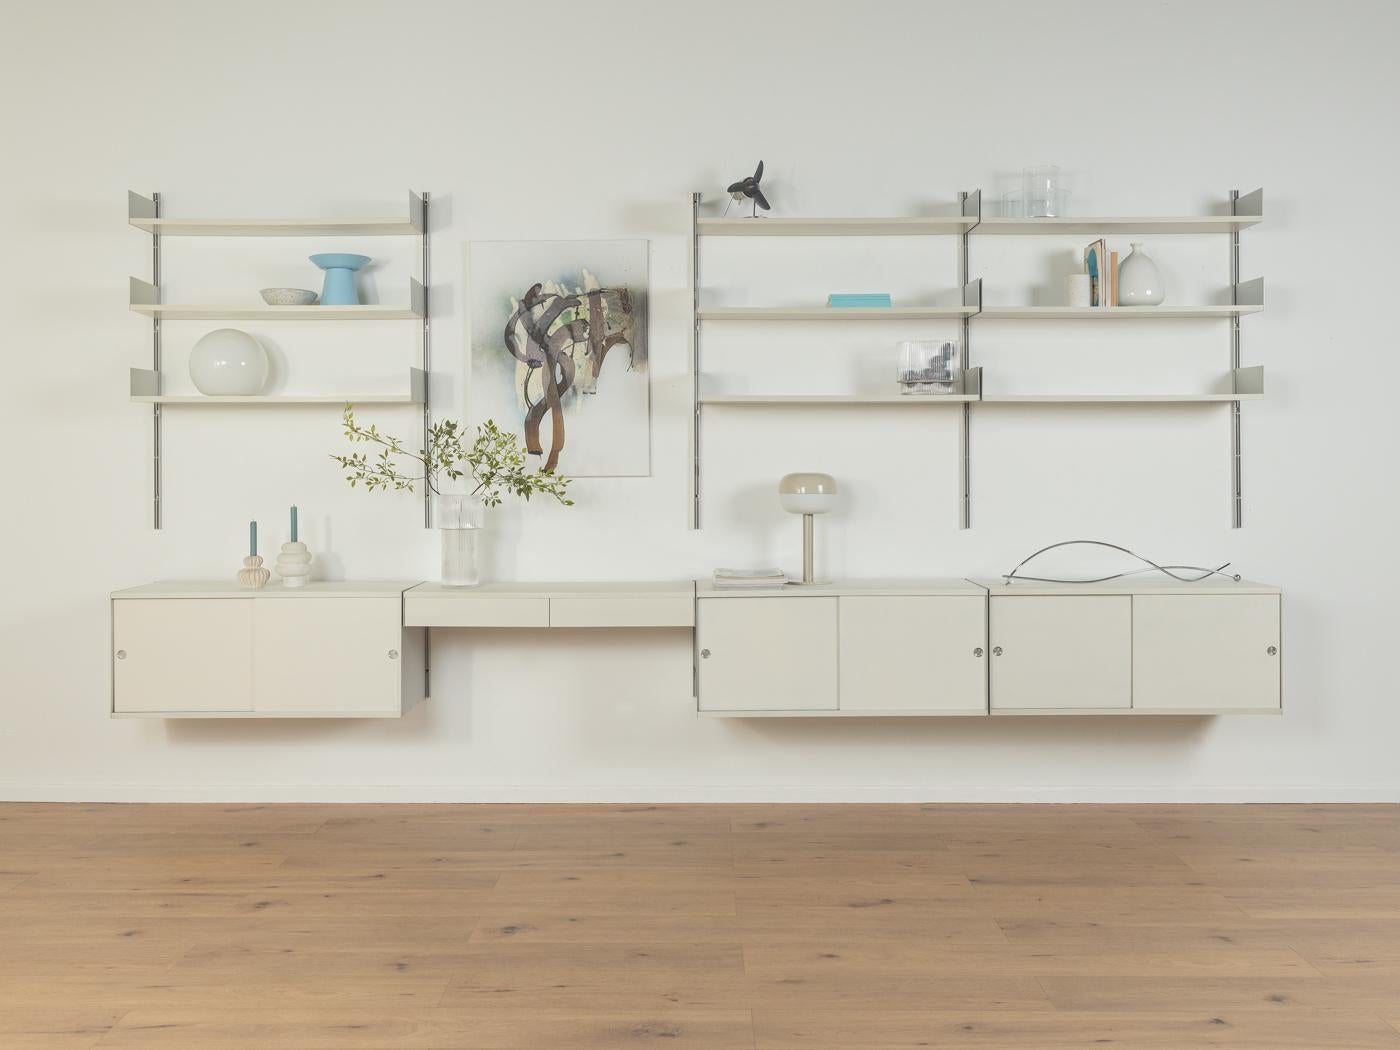 Modular 606 shelving system by Dieter Rams for Vitsœ from the 1960s. High-quality construction consisting of ten aluminum E-Tracks, nine shelves, three cabinets with sliding doors and one shelf with two drawers.

Quality Features:
-accomplished